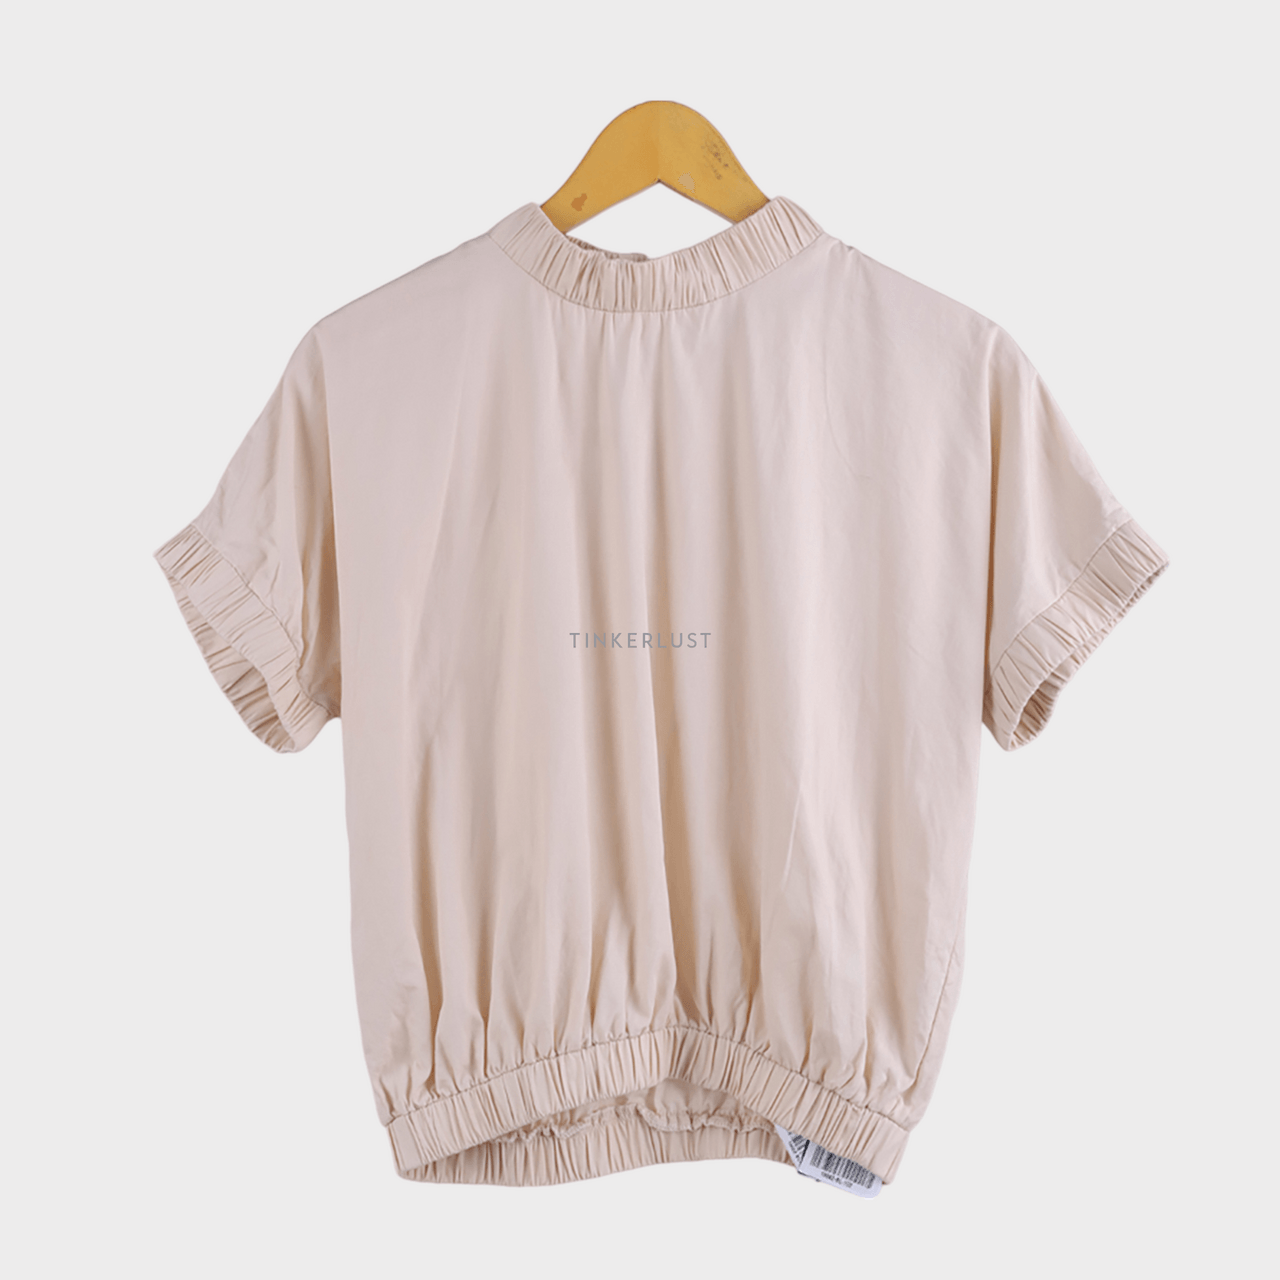 Beatrice Clothing Beige Blouse